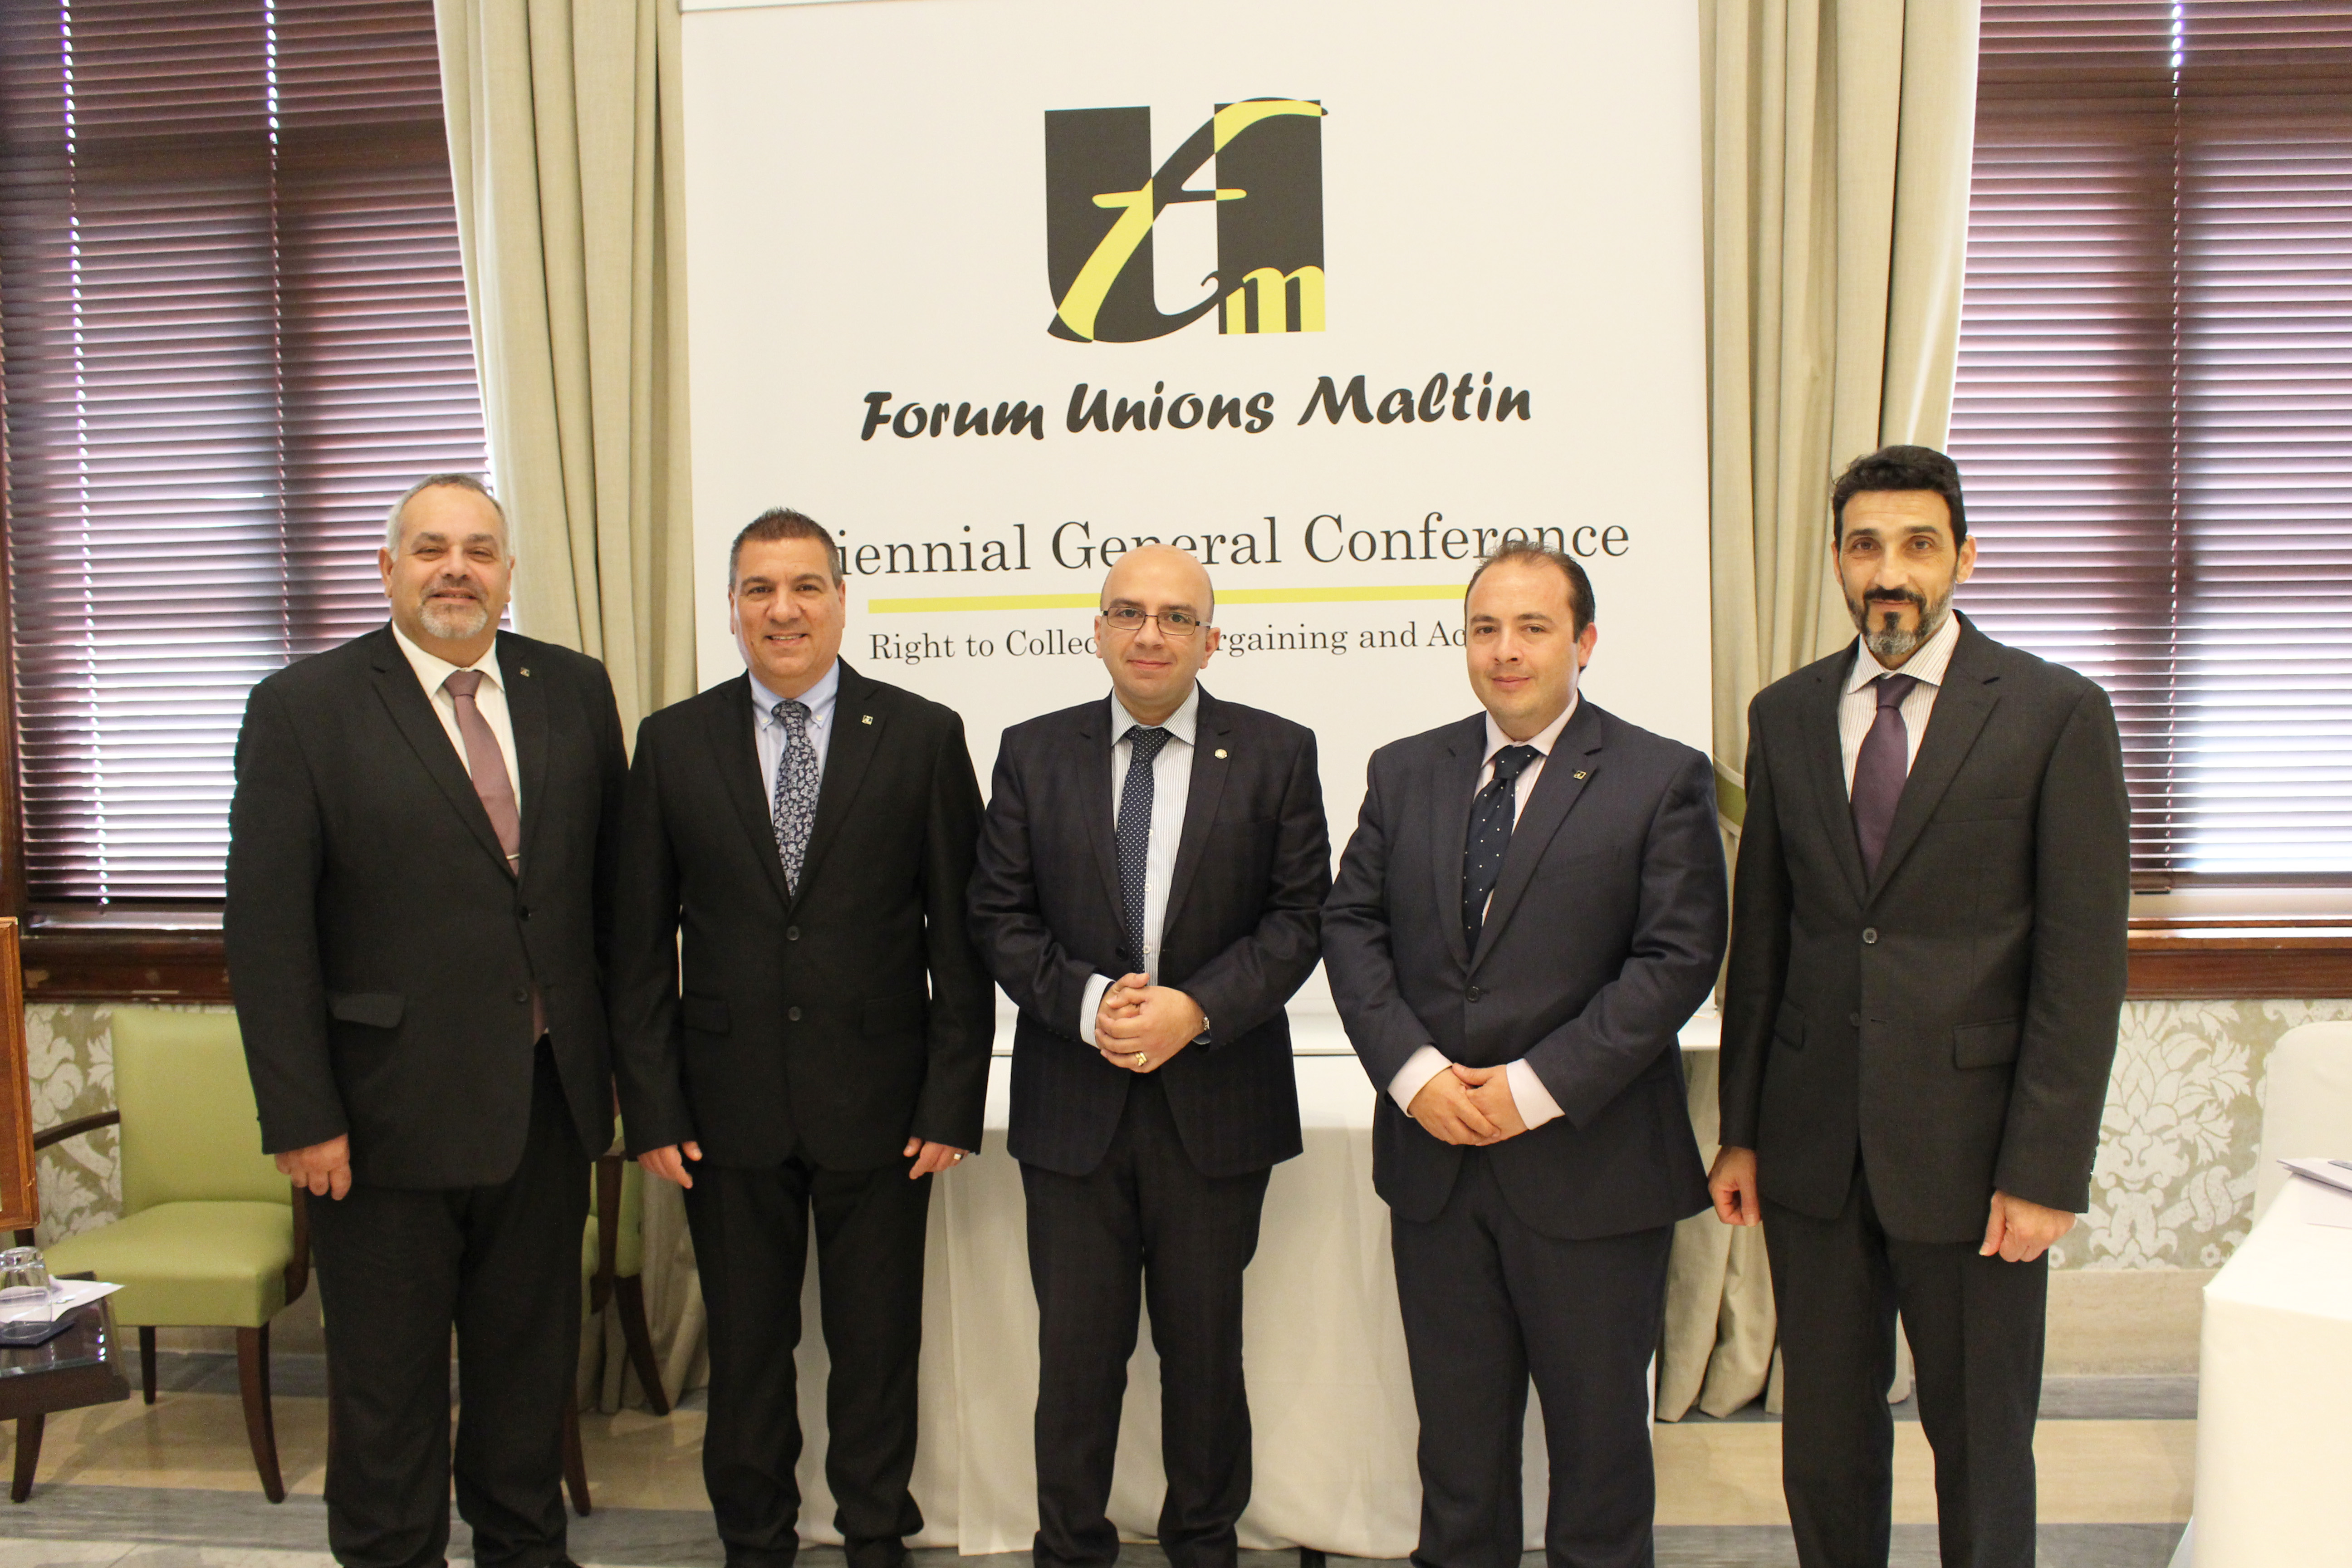 New For.U.M. Executive Council 2018-2021 – Marco Bonnici elected For.U.M. President